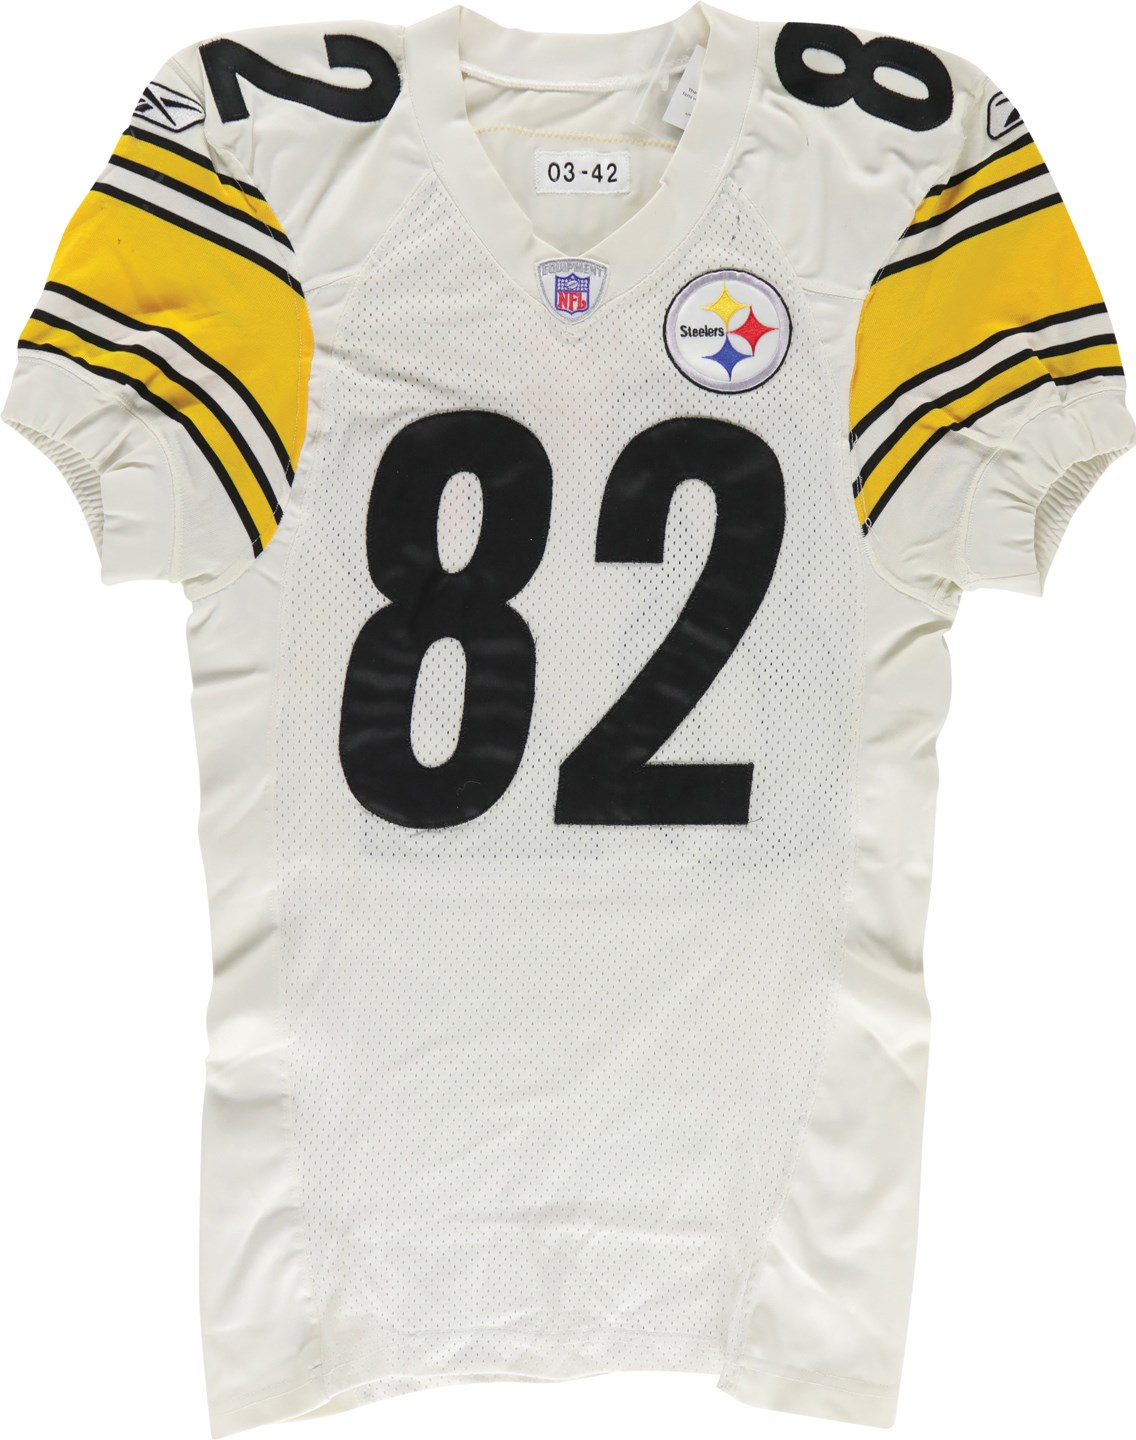 - 2003 Antwaan Randle El Pittsburgh Steelers Game Worn Jersey - Matched to Four Games with 3rd Career TD Catch & Career High Kick Return Yards Game (Photo-Matched & Steelers COA)